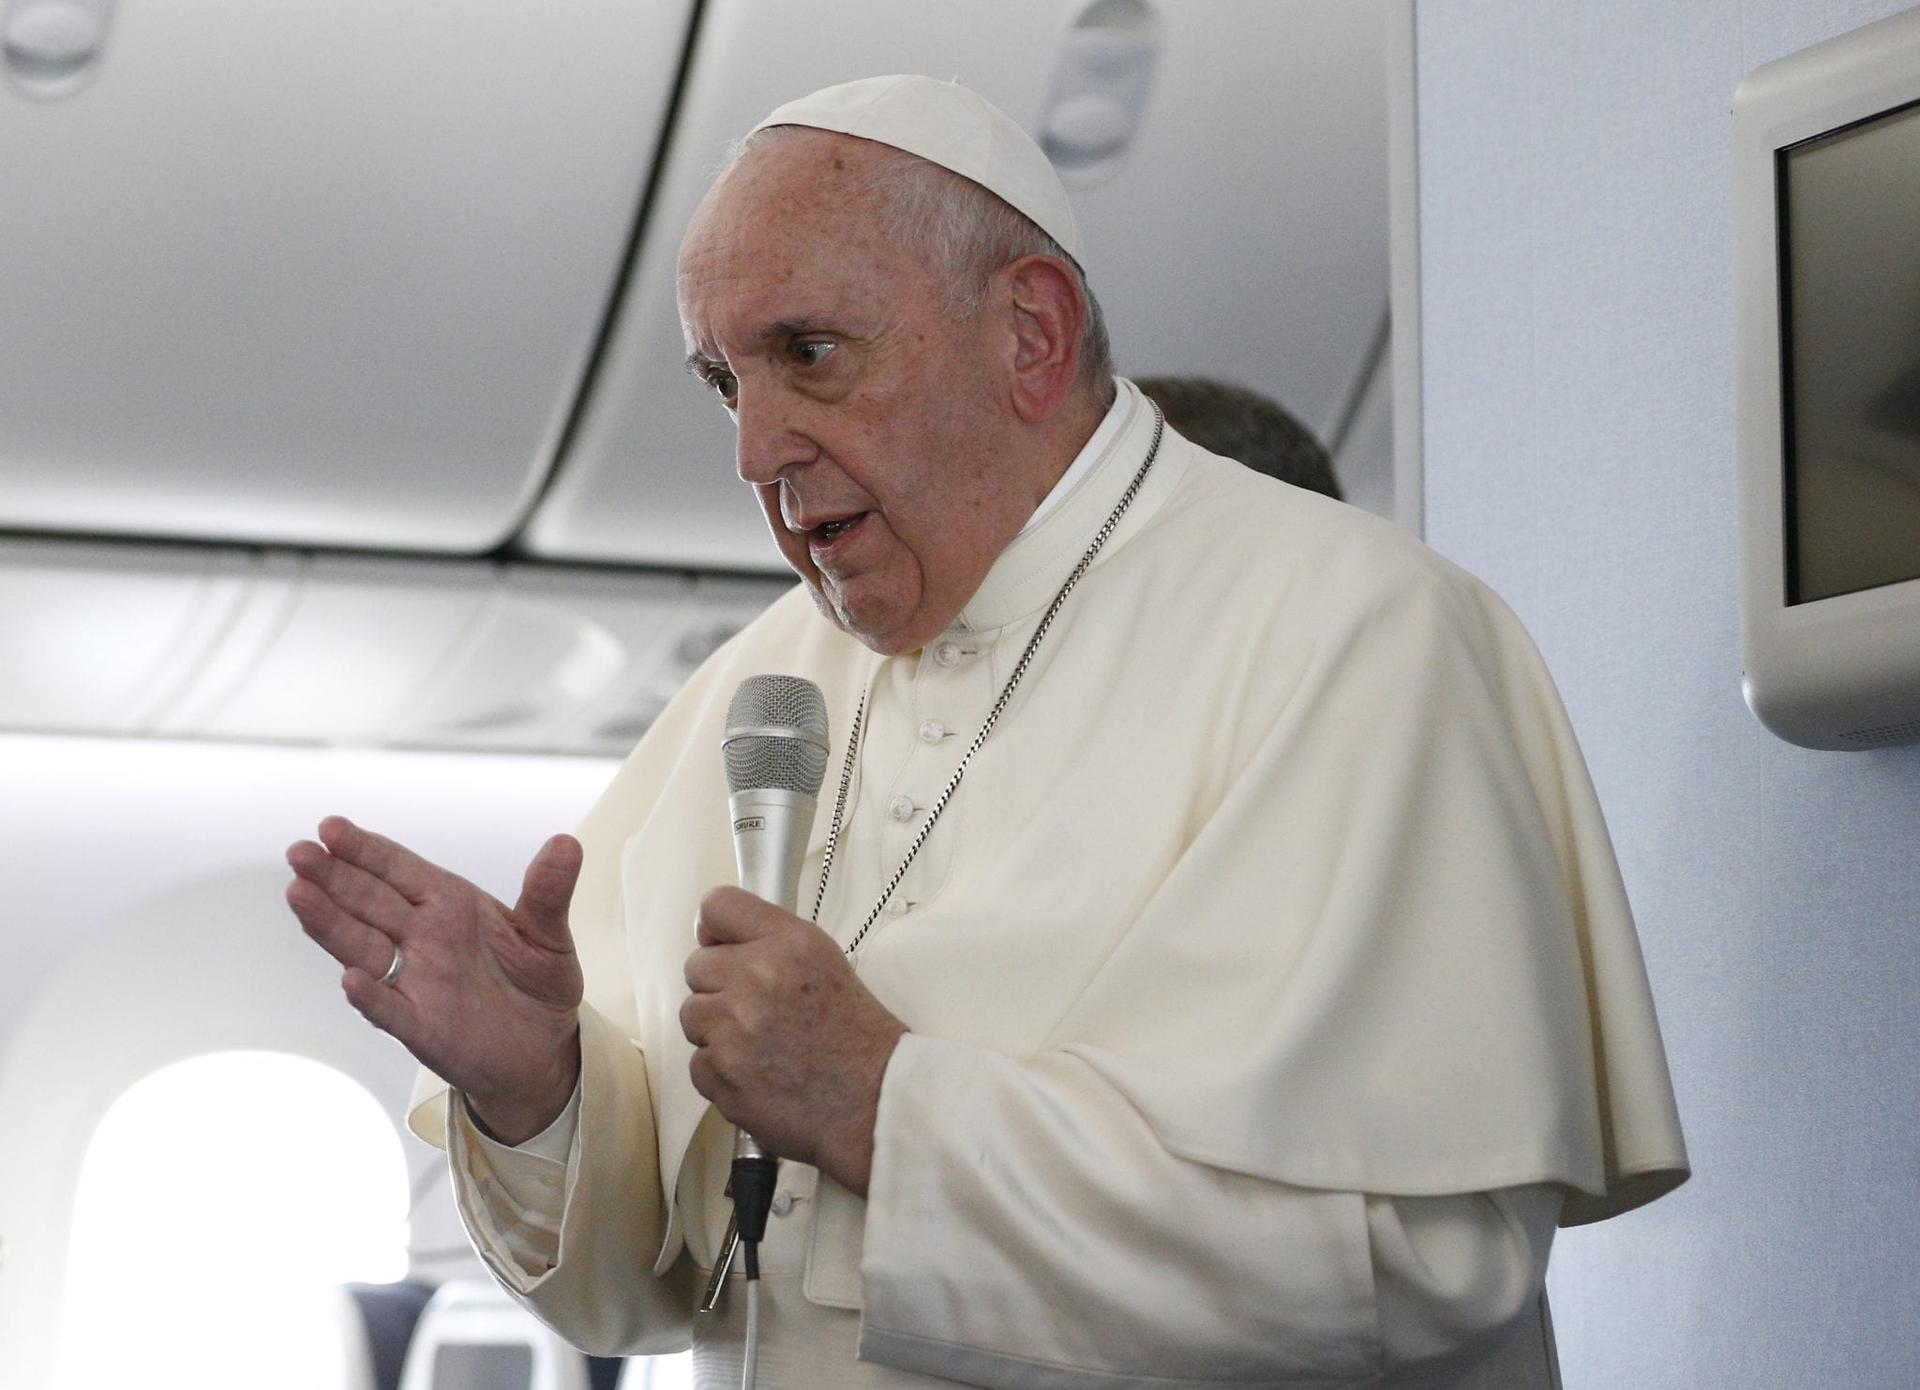 Pope’s 2019: Preaching the Gospel globally, dealing with scandals